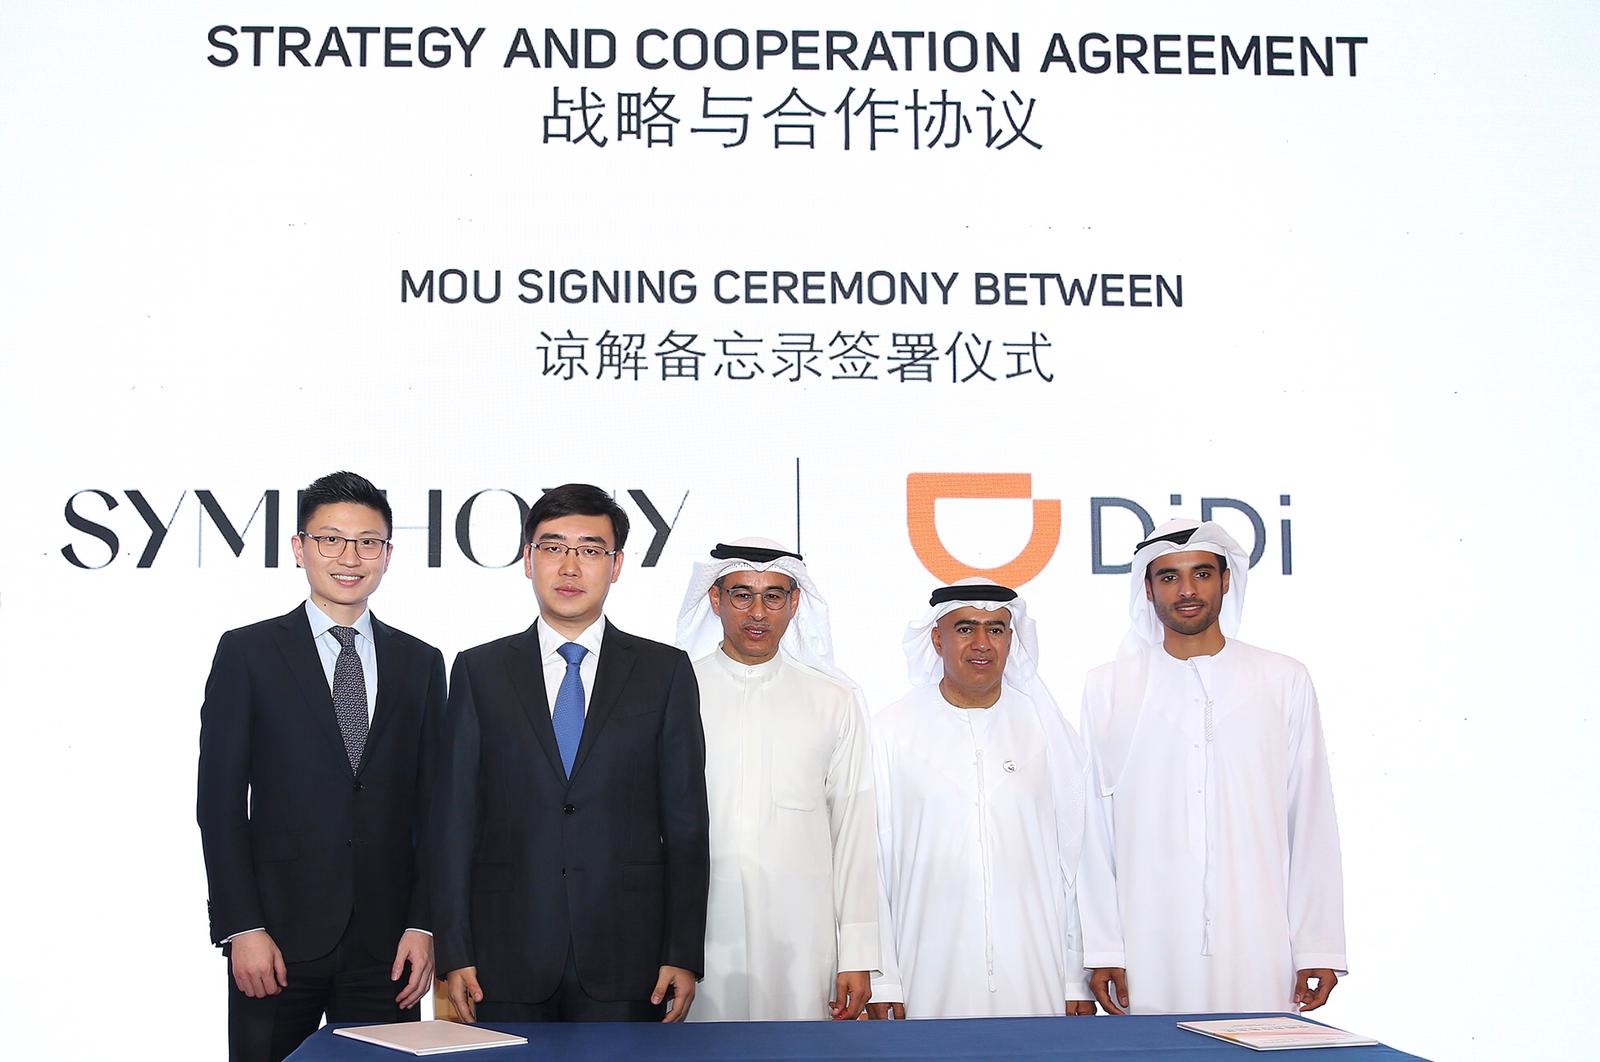 Didi plans Middle East and North Africa expansion by teaming up with Symphony Investment